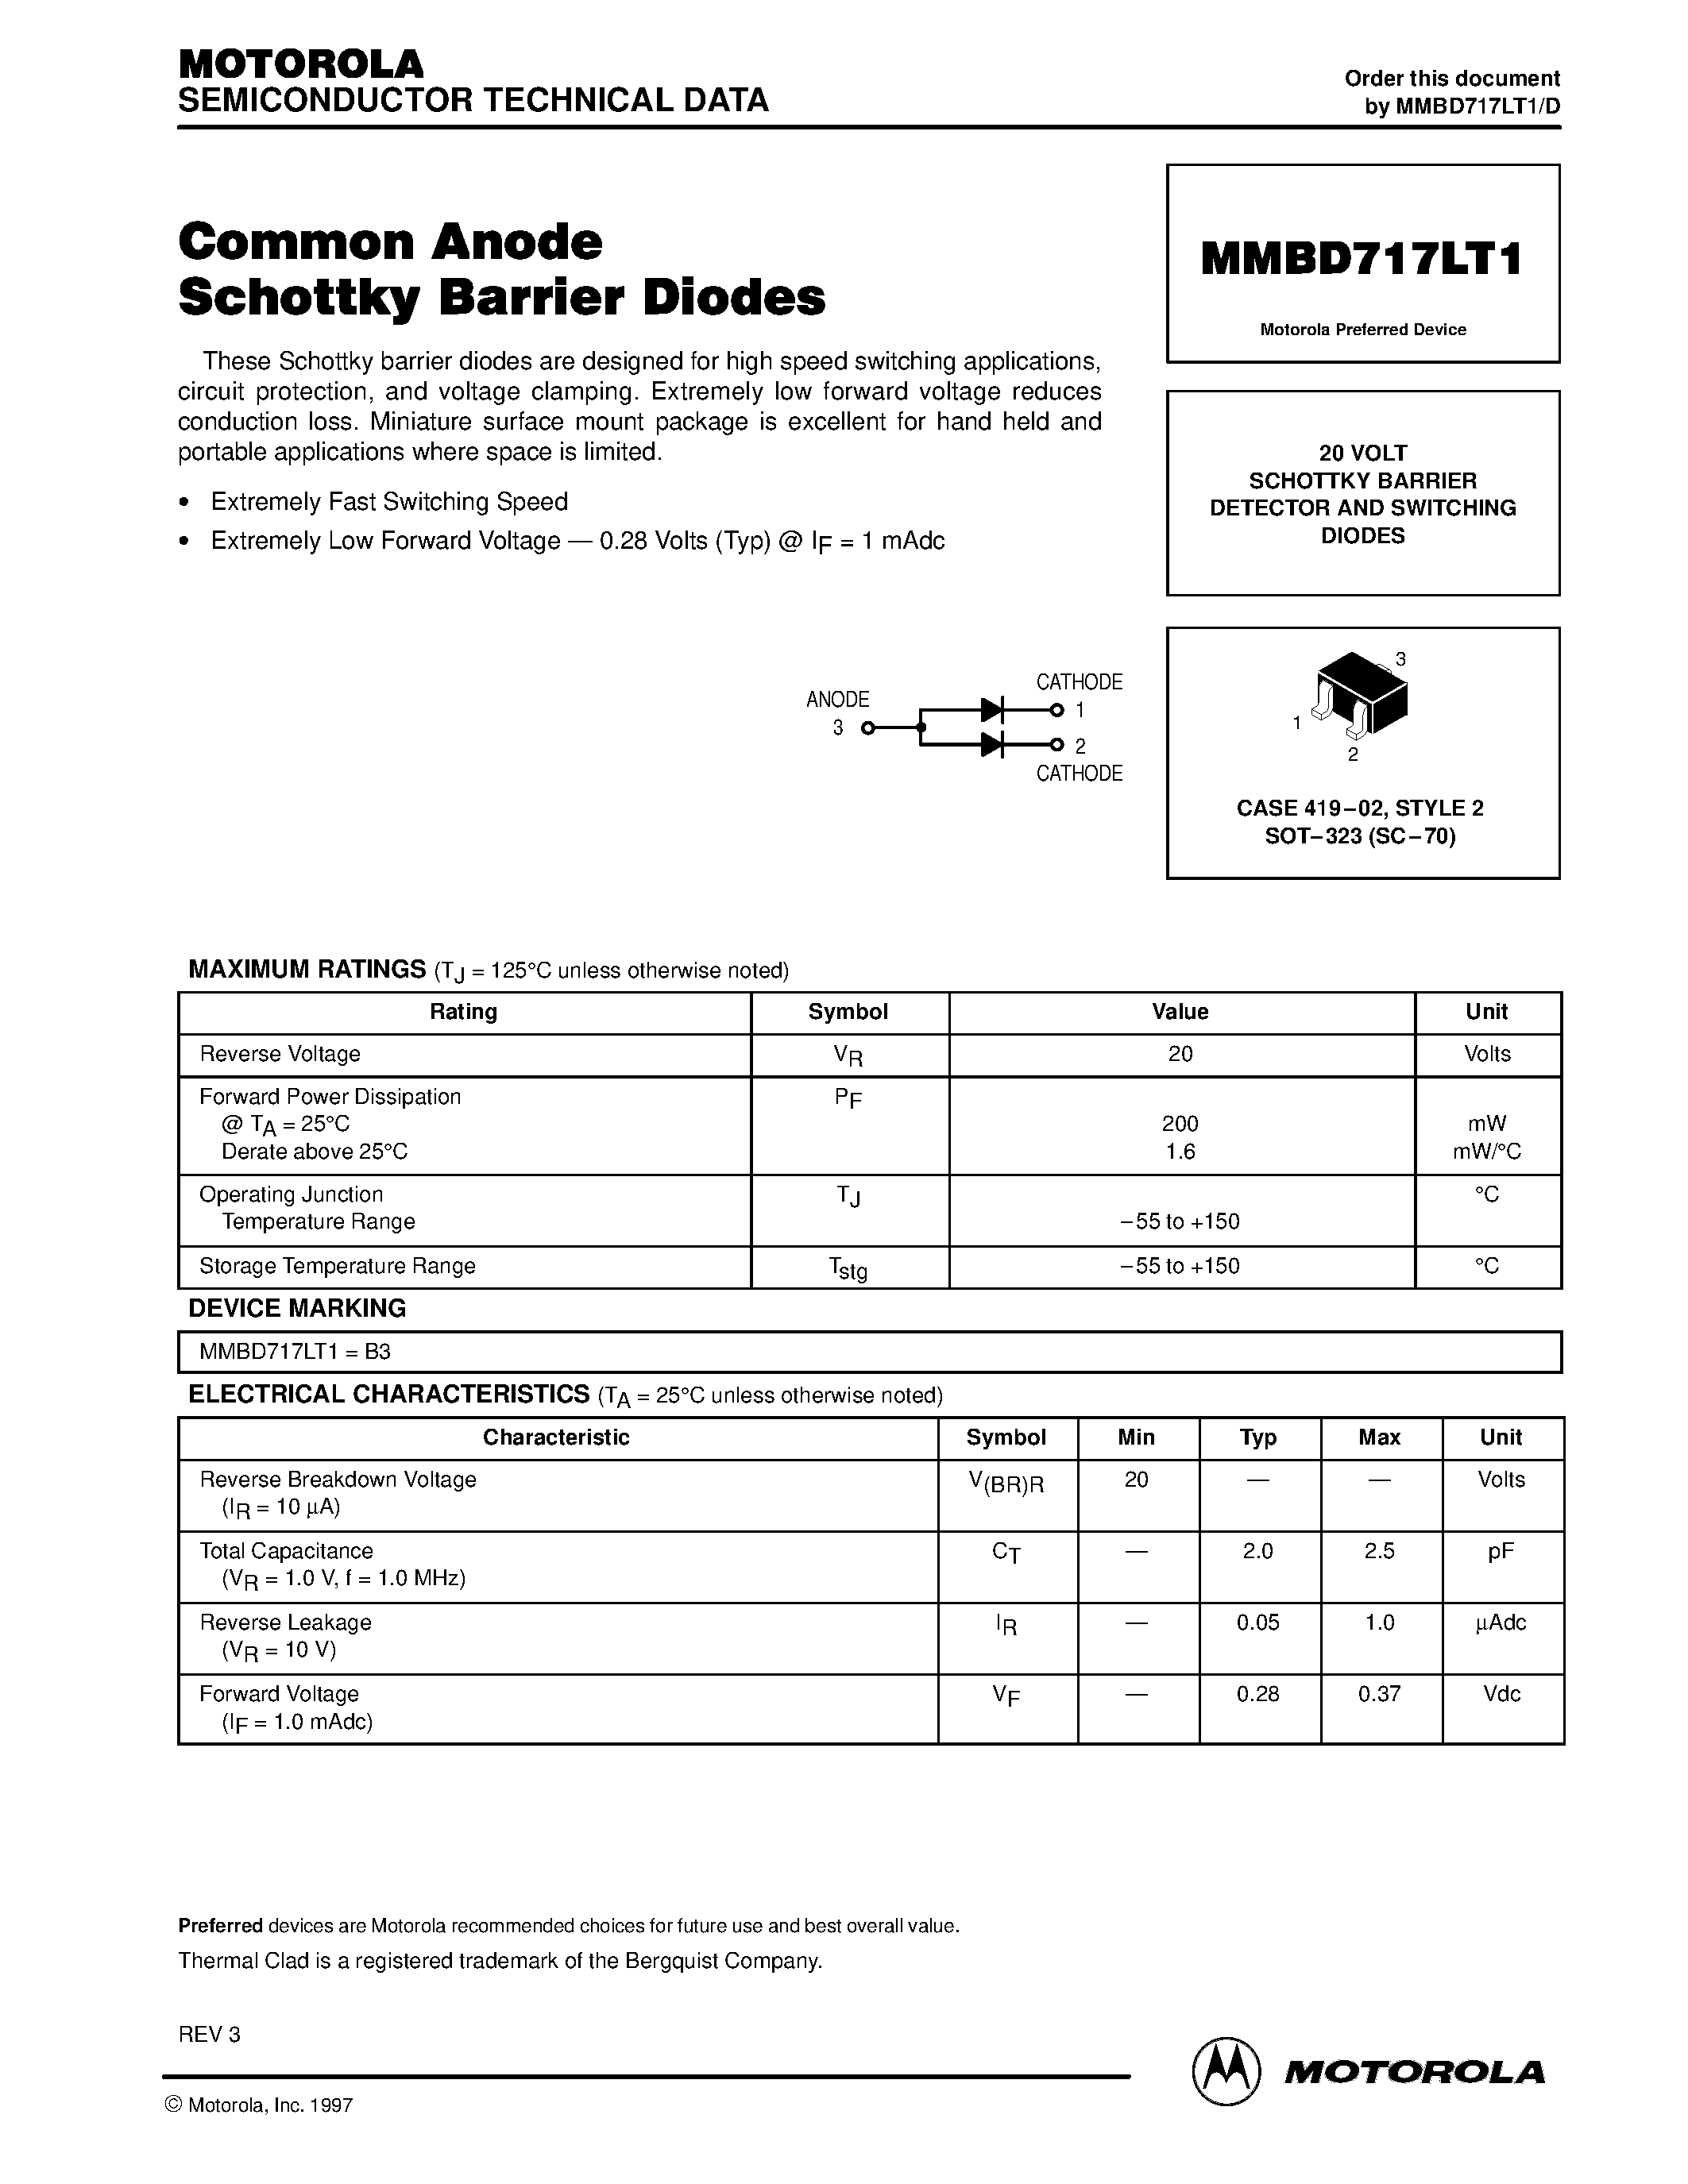 Datasheet MMBD717LT1 - Common Anode Schottky Barrier Diodes page 1